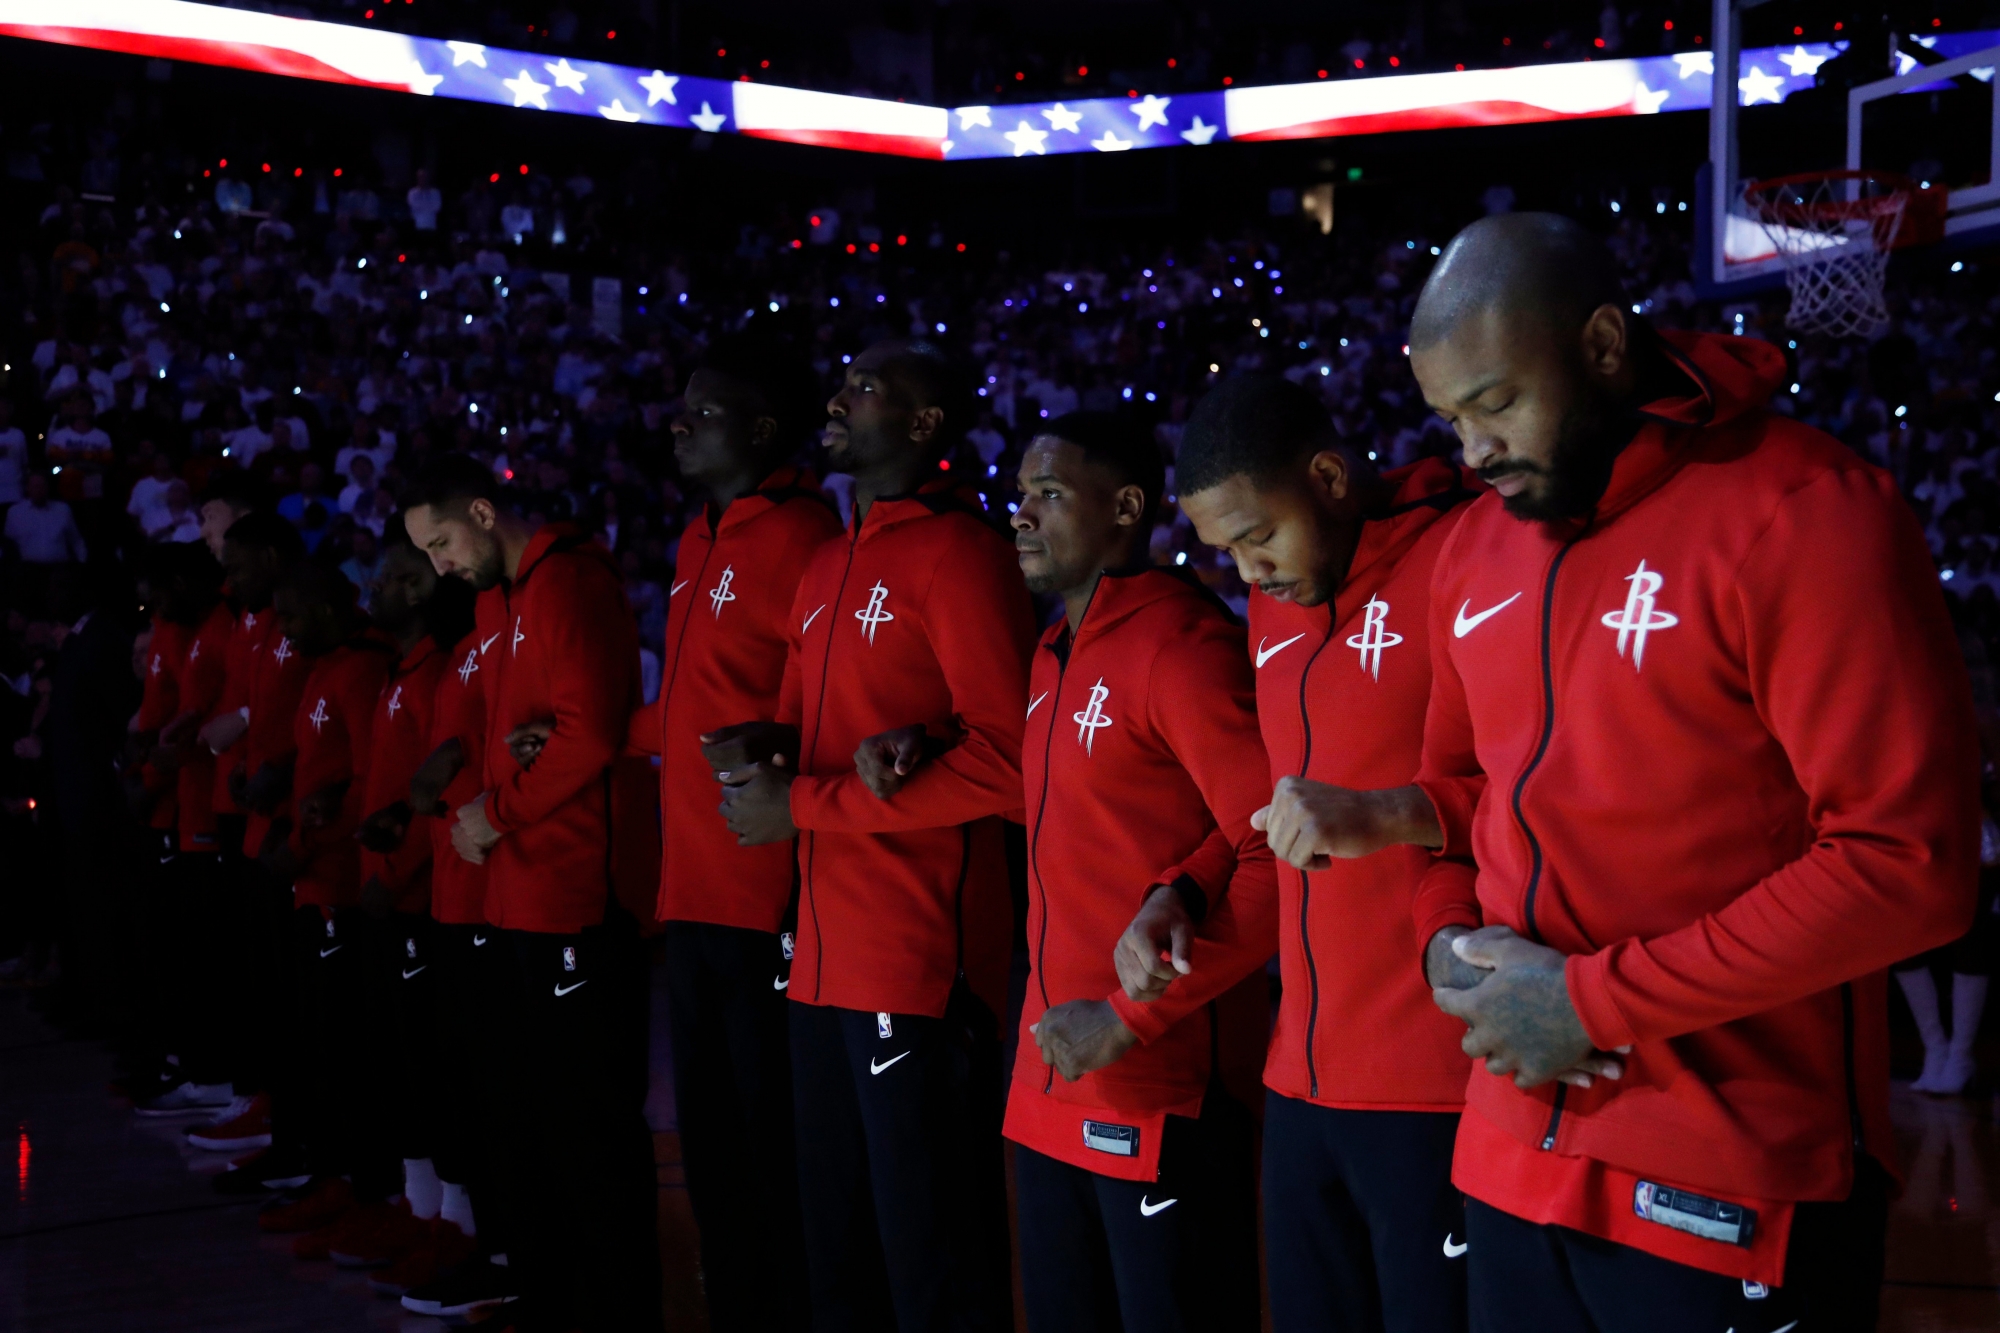 epa06272391 The Houston Rockets players lock arms during the national anthem before the NBA basketball game between the Houston Rockets and the Golden State Warriors at Oracle Arena in Oakland, California, USA, 17 October 2017.  EPA/JOHN G. MABANGLO USA BASKETBALL NBA